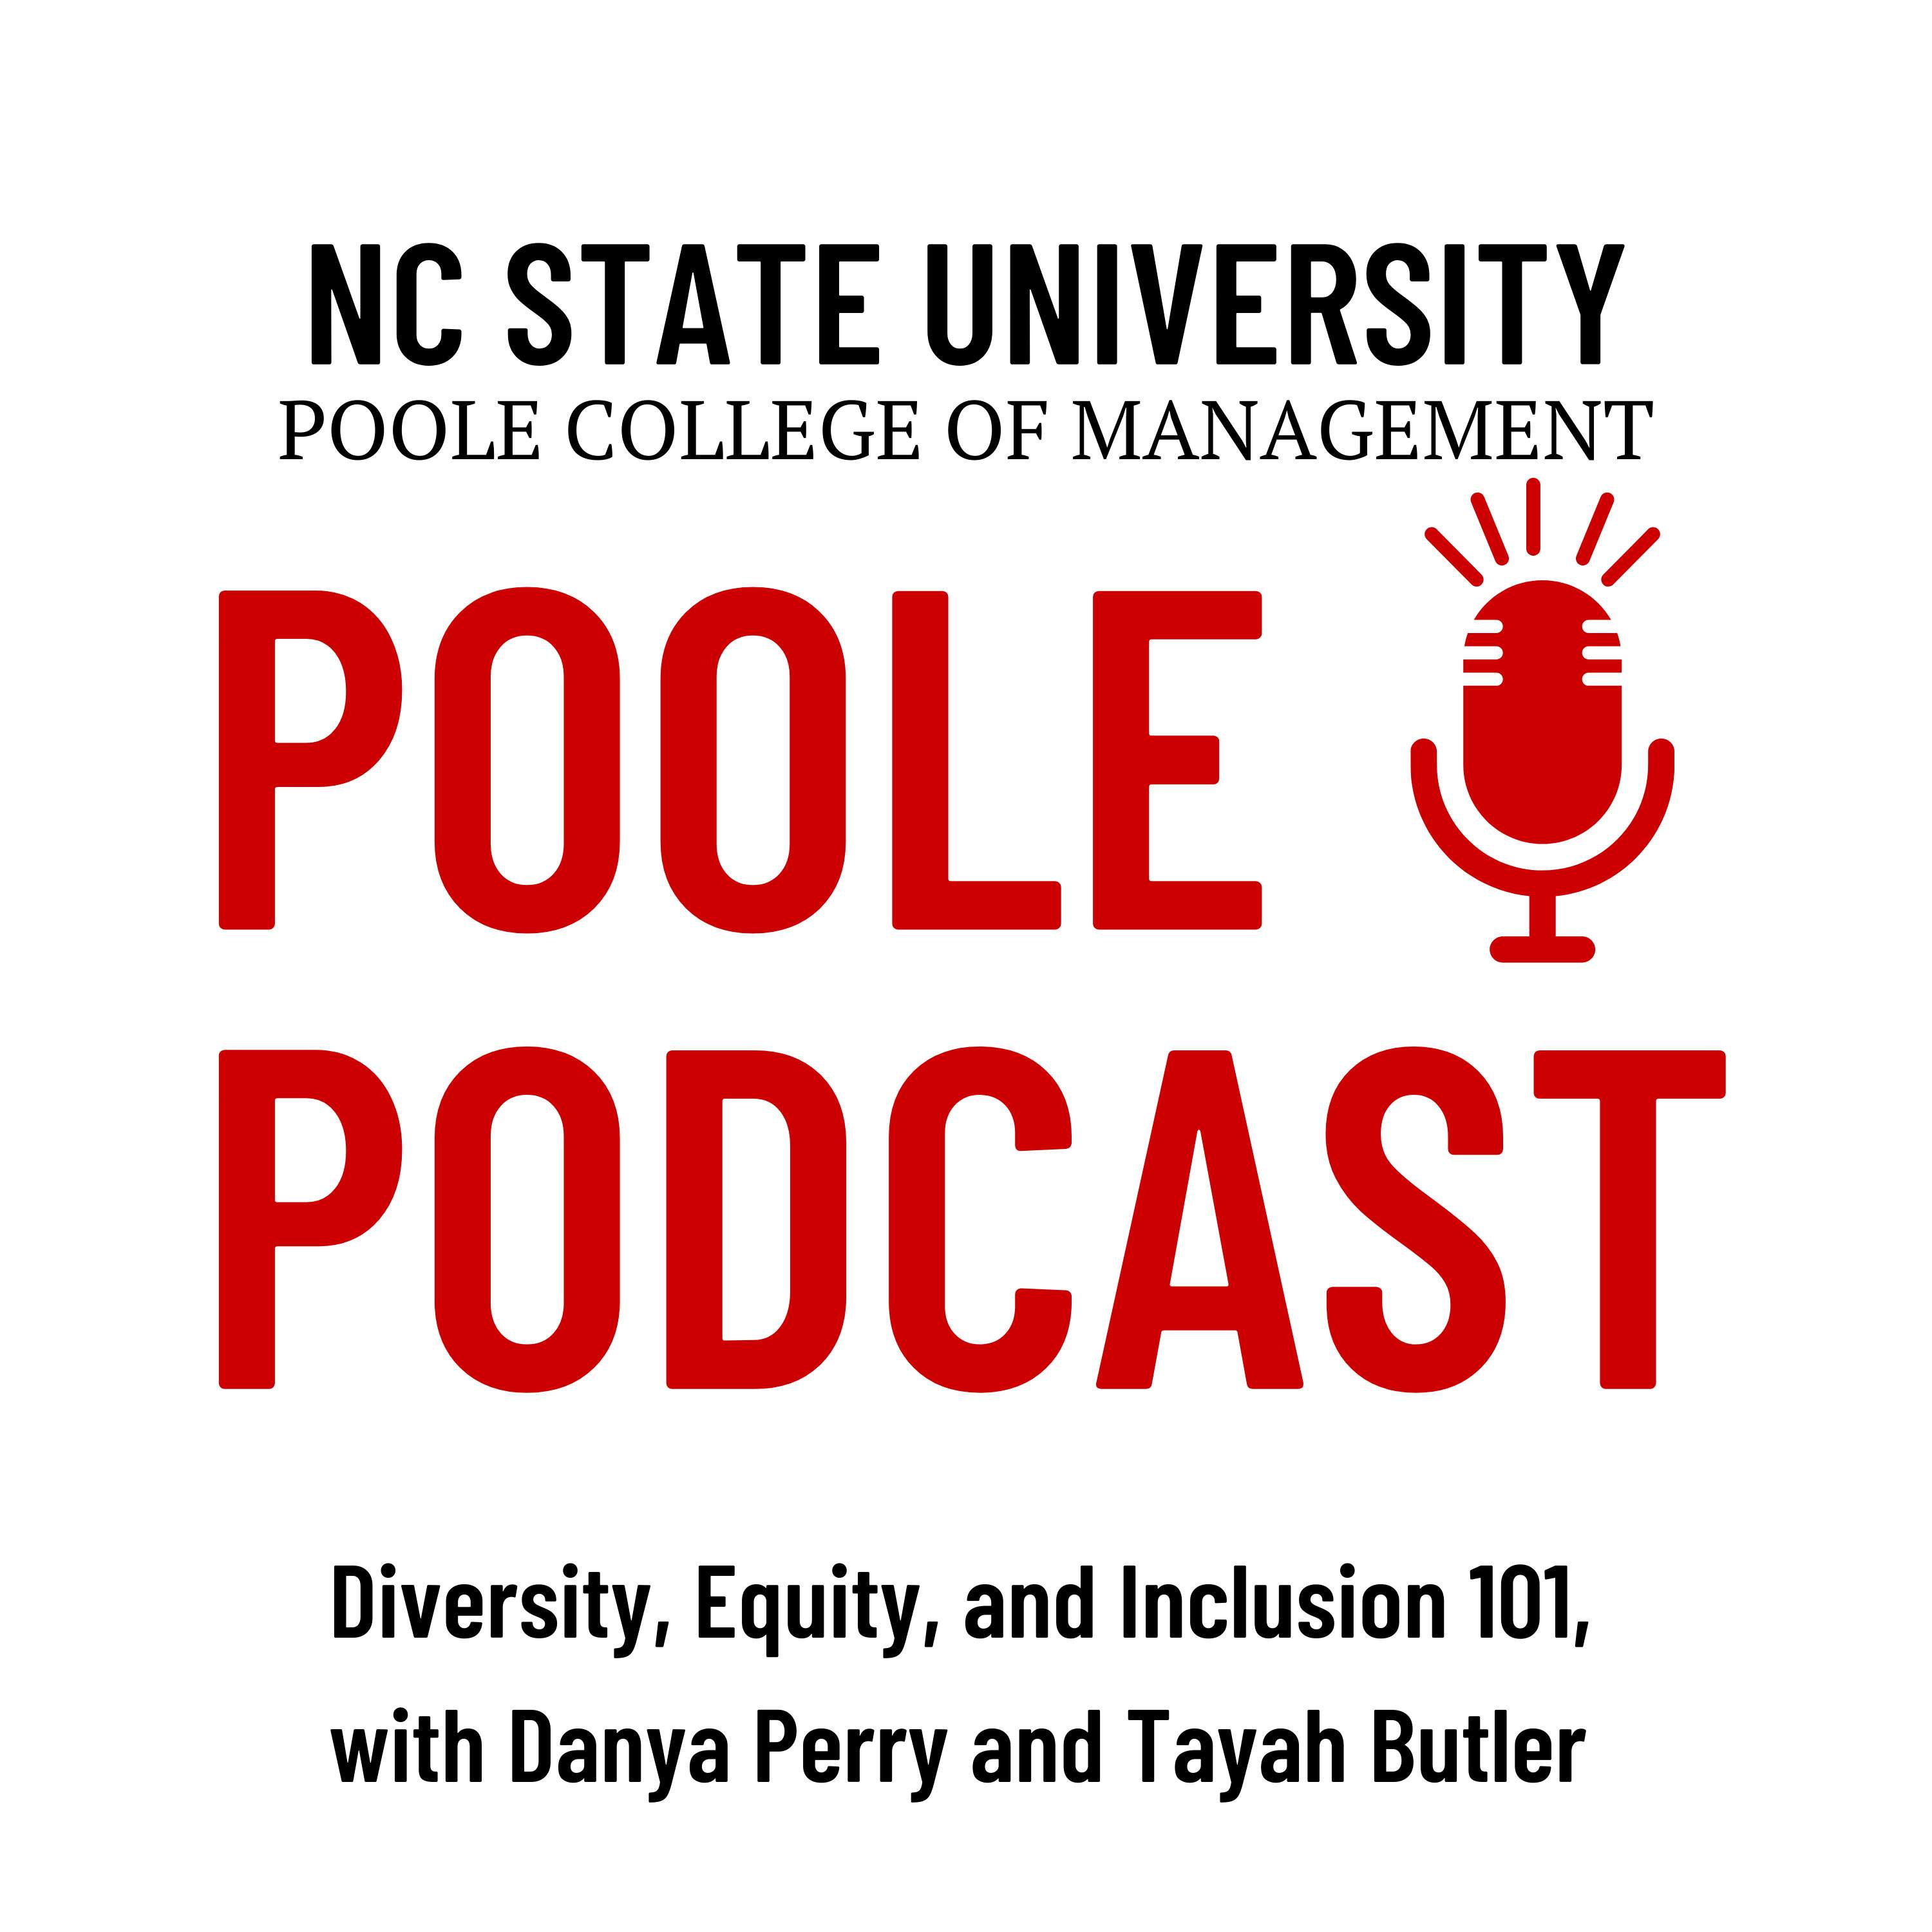 Diversity, Equity & Inclusion (DEI) 101, with Tayah Butler and Danya Perry